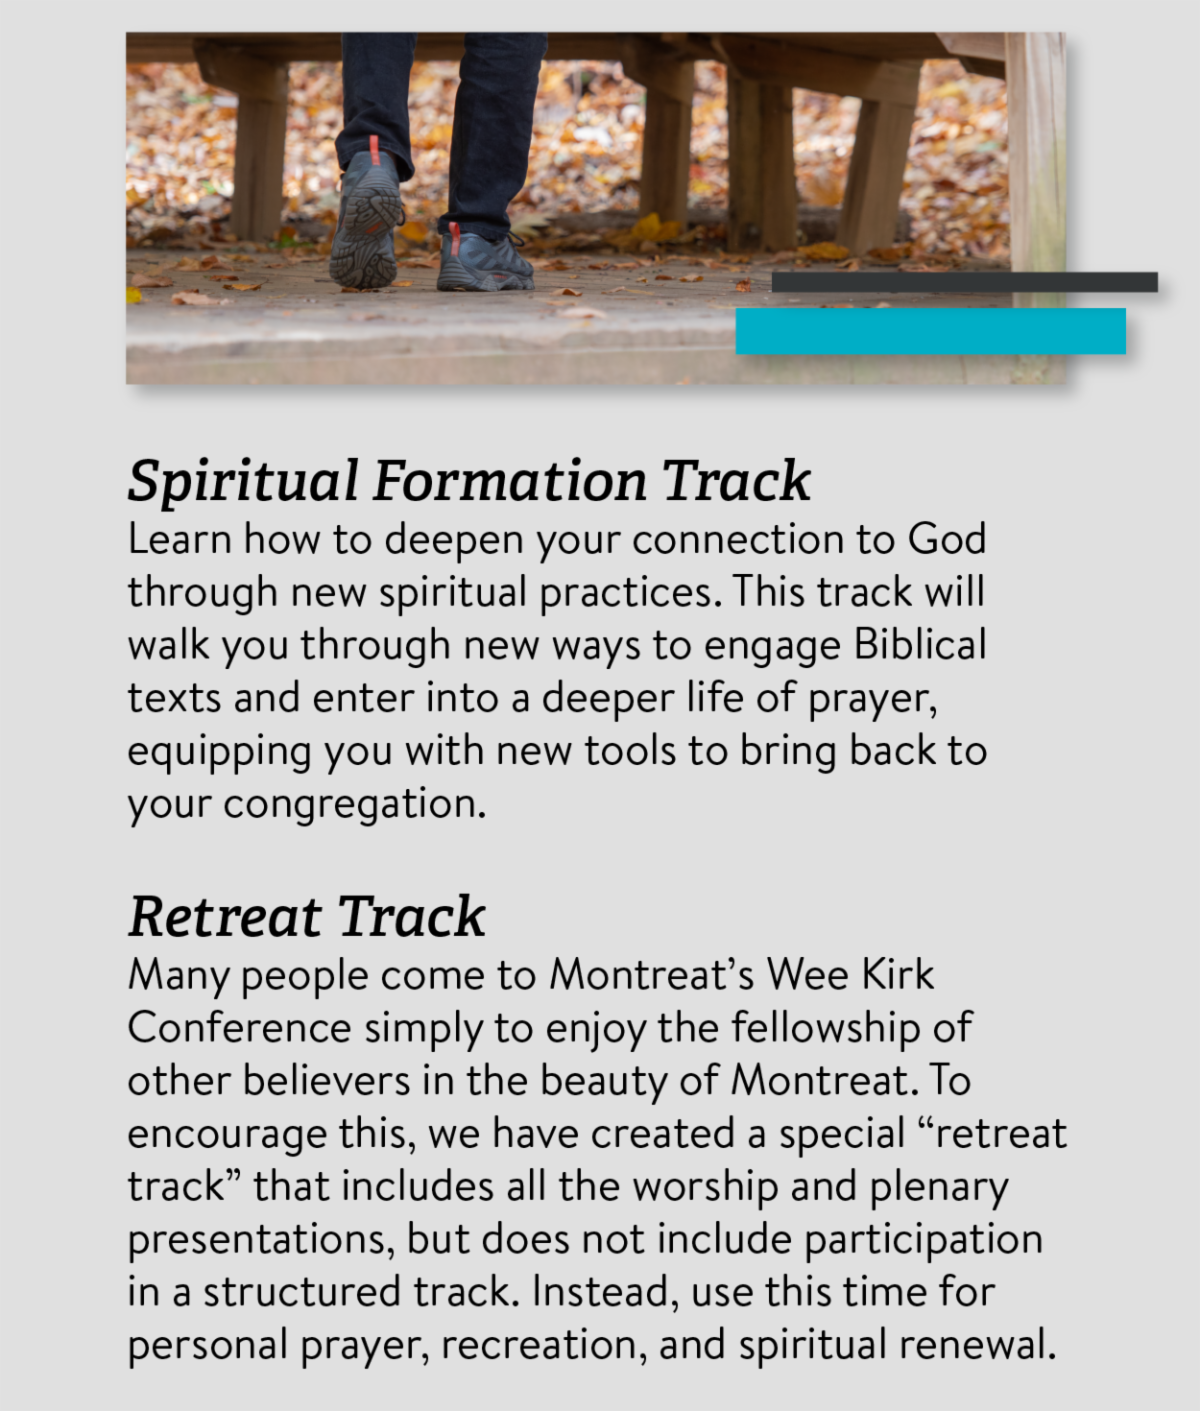 Spiritual Formation Track Learn how to deepen your connection to God through new spiritual practices. This track will walk you through new ways to engage Biblical texts and enter into a deeper life of prayer, equipping you with new tools to bring back to your congregation. Retreat Track Many people come to Montreat’s Wee Kirk Conference simply to enjoy the fellowship of other believers in the beauty of Montreat. To encourage this, we have created a special “retreat track” that includes all the worship and plenary presentations, but does not include participation in a structured track. Instead, use this time for personal prayer, recreation, and spiritual renewal.